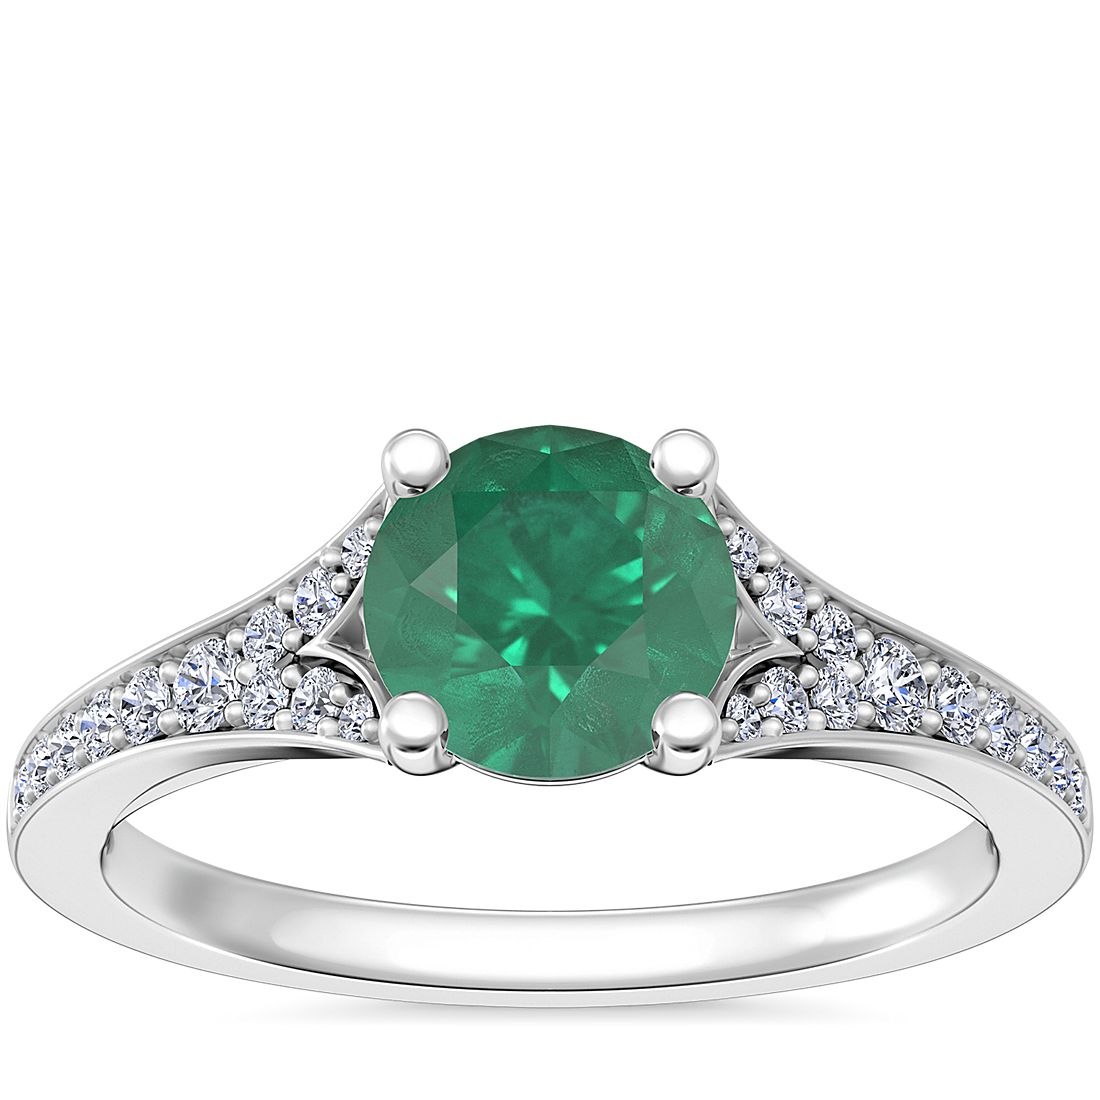 Petite Split Shank Pavé Cathedral Engagement Ring with Round Emerald in Platinum (6.5mm)